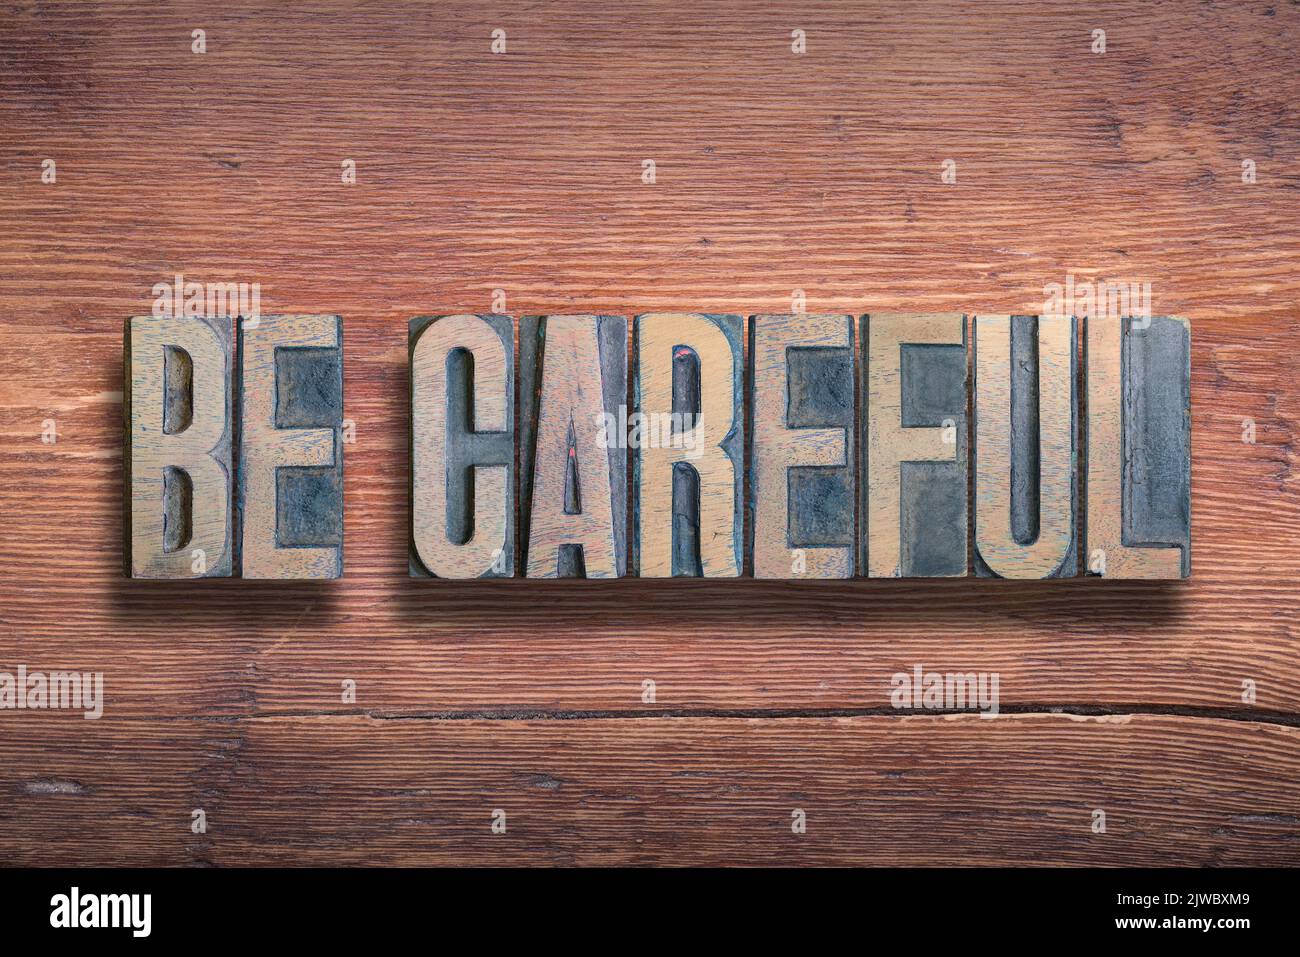 be careful phrase combined on vintage varnished wooden surface Stock Photo